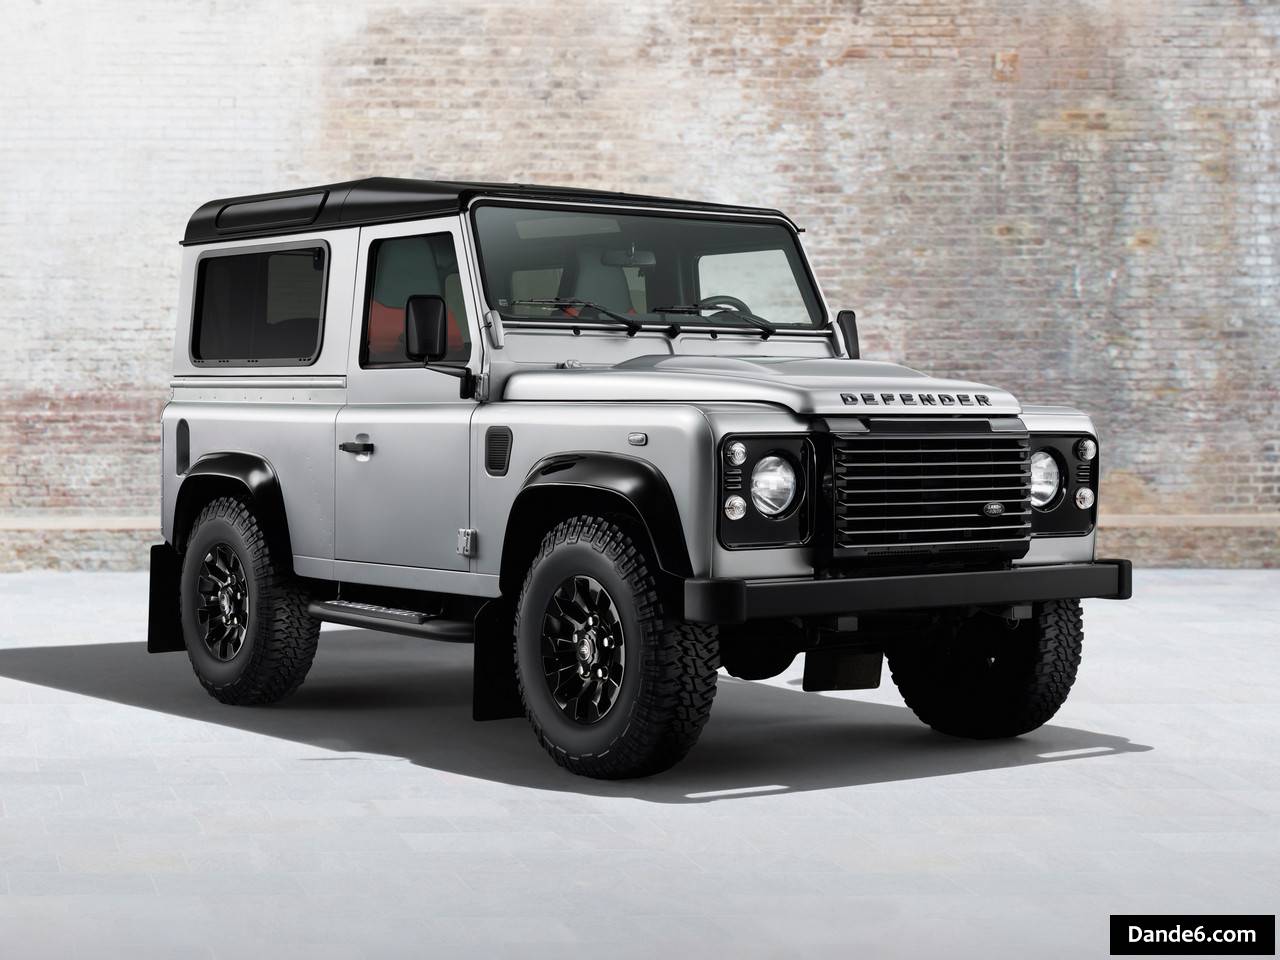 2014 Land Rover Defender Black and Silver Packs